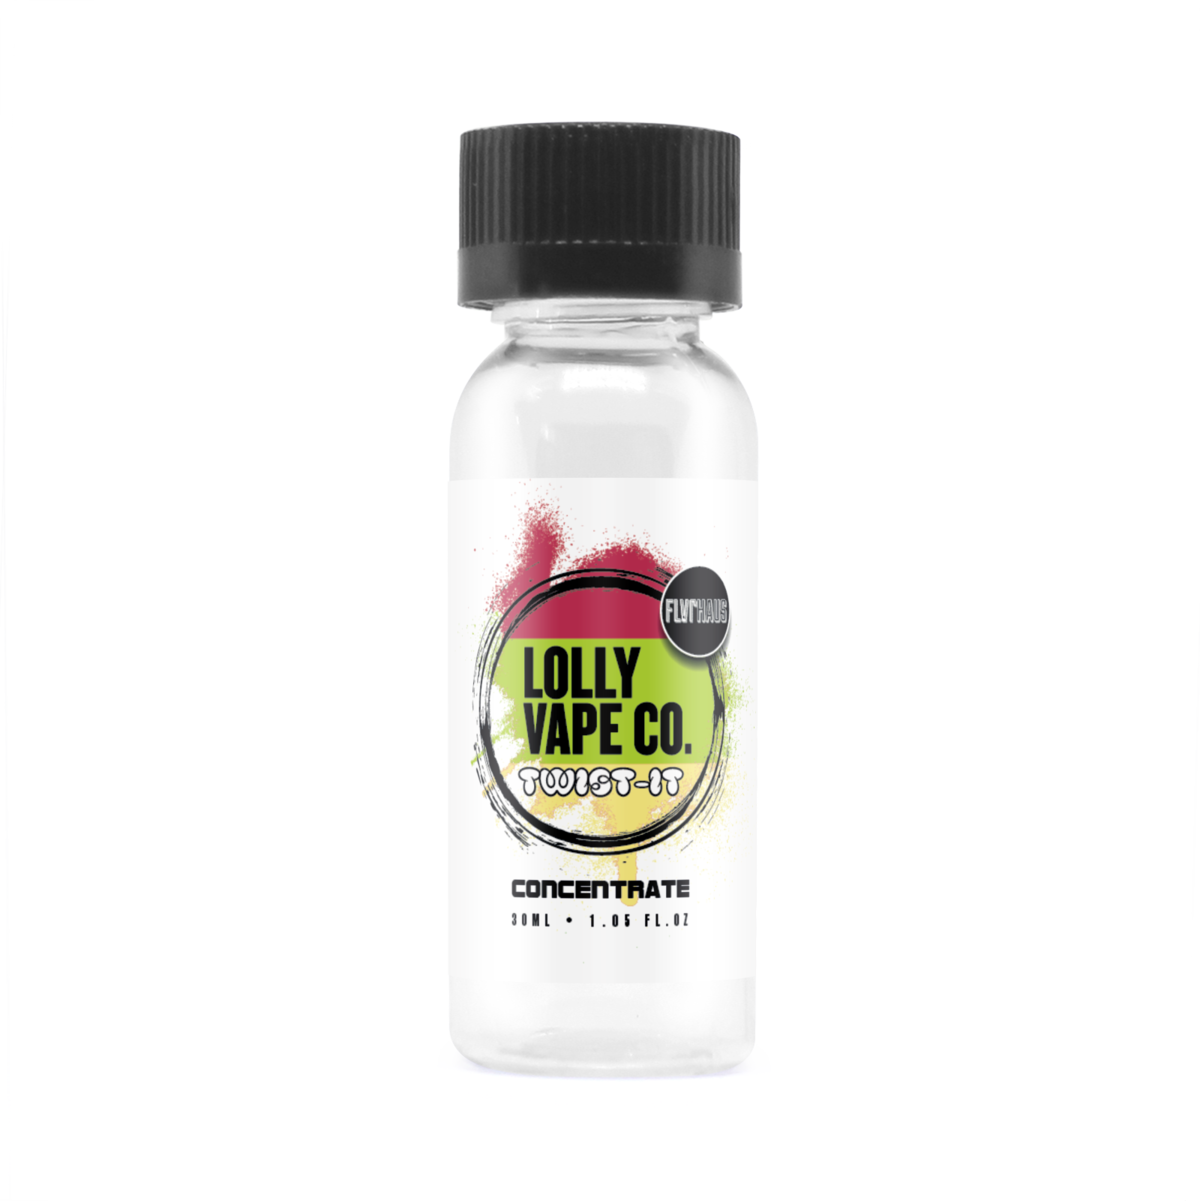 Twist it Concentrate E-liquid by Lolly Vape Co 30ml